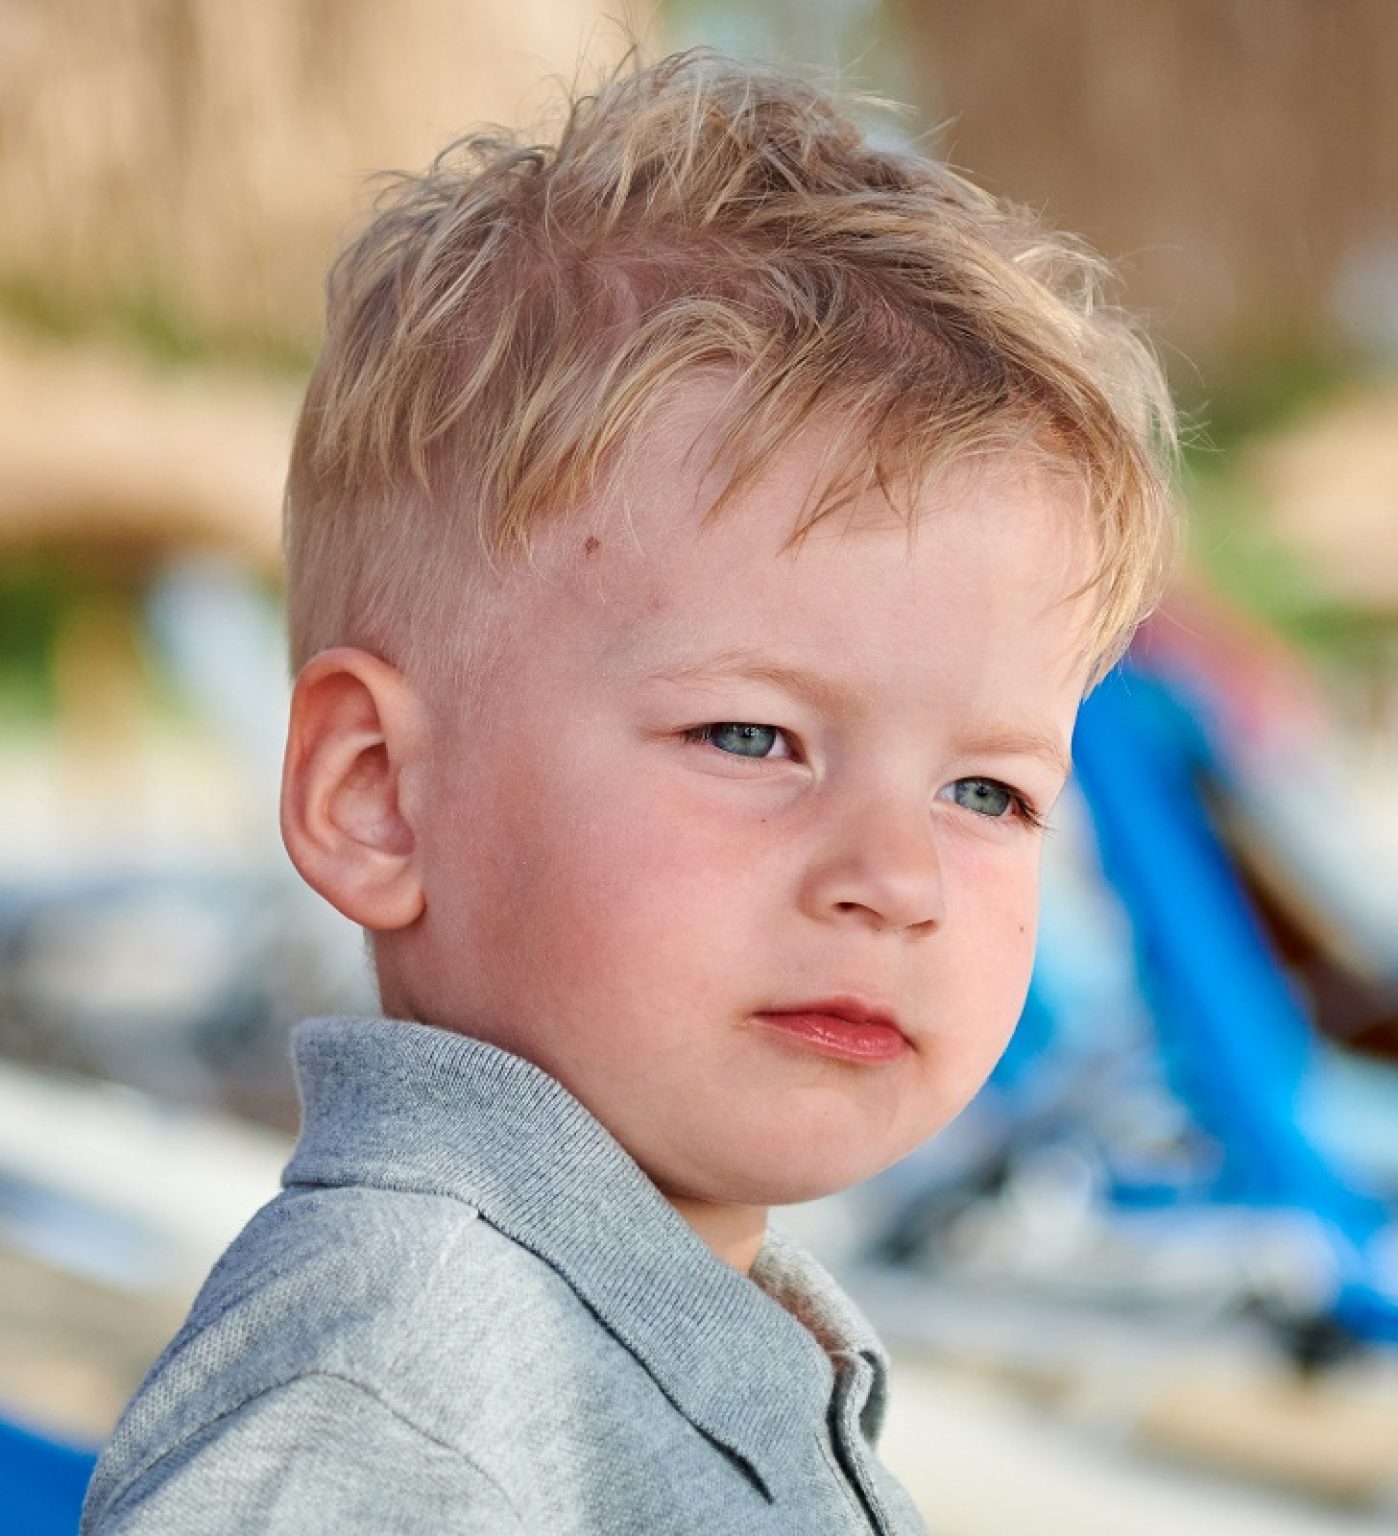 60 Baby Boy Haircuts That'll Make Your Baby Look Cuter